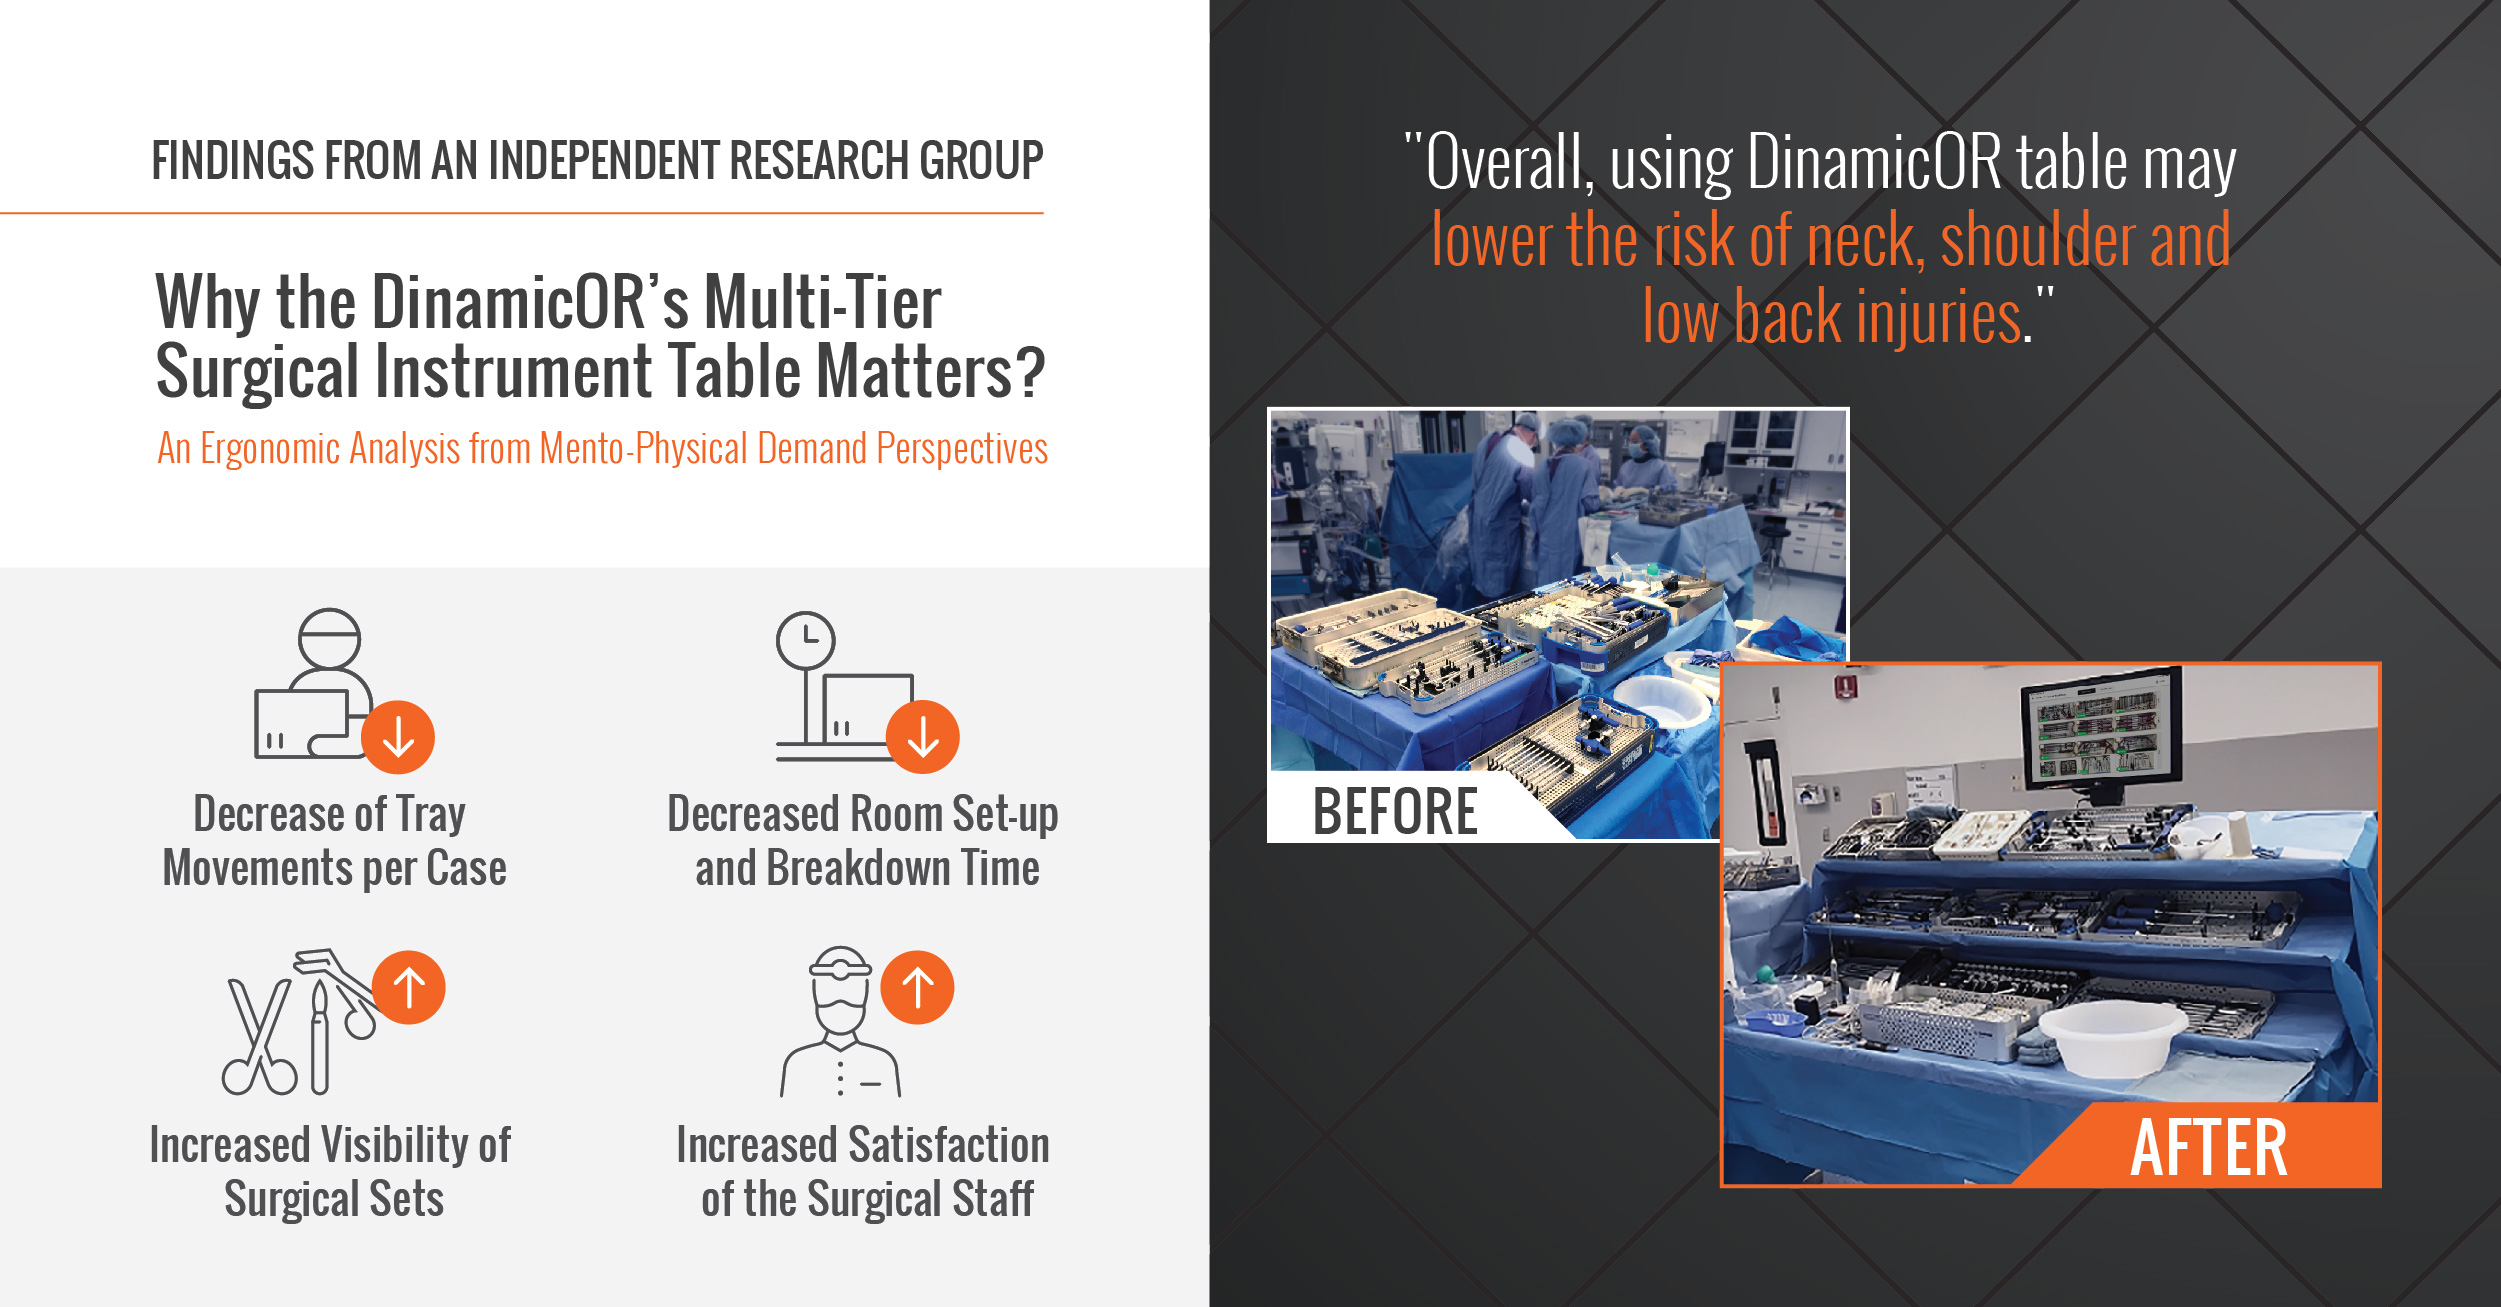 Here’s How Using DinamicOR Table Can Help Reduce Neck, Shoulder, and Low Back Injuries